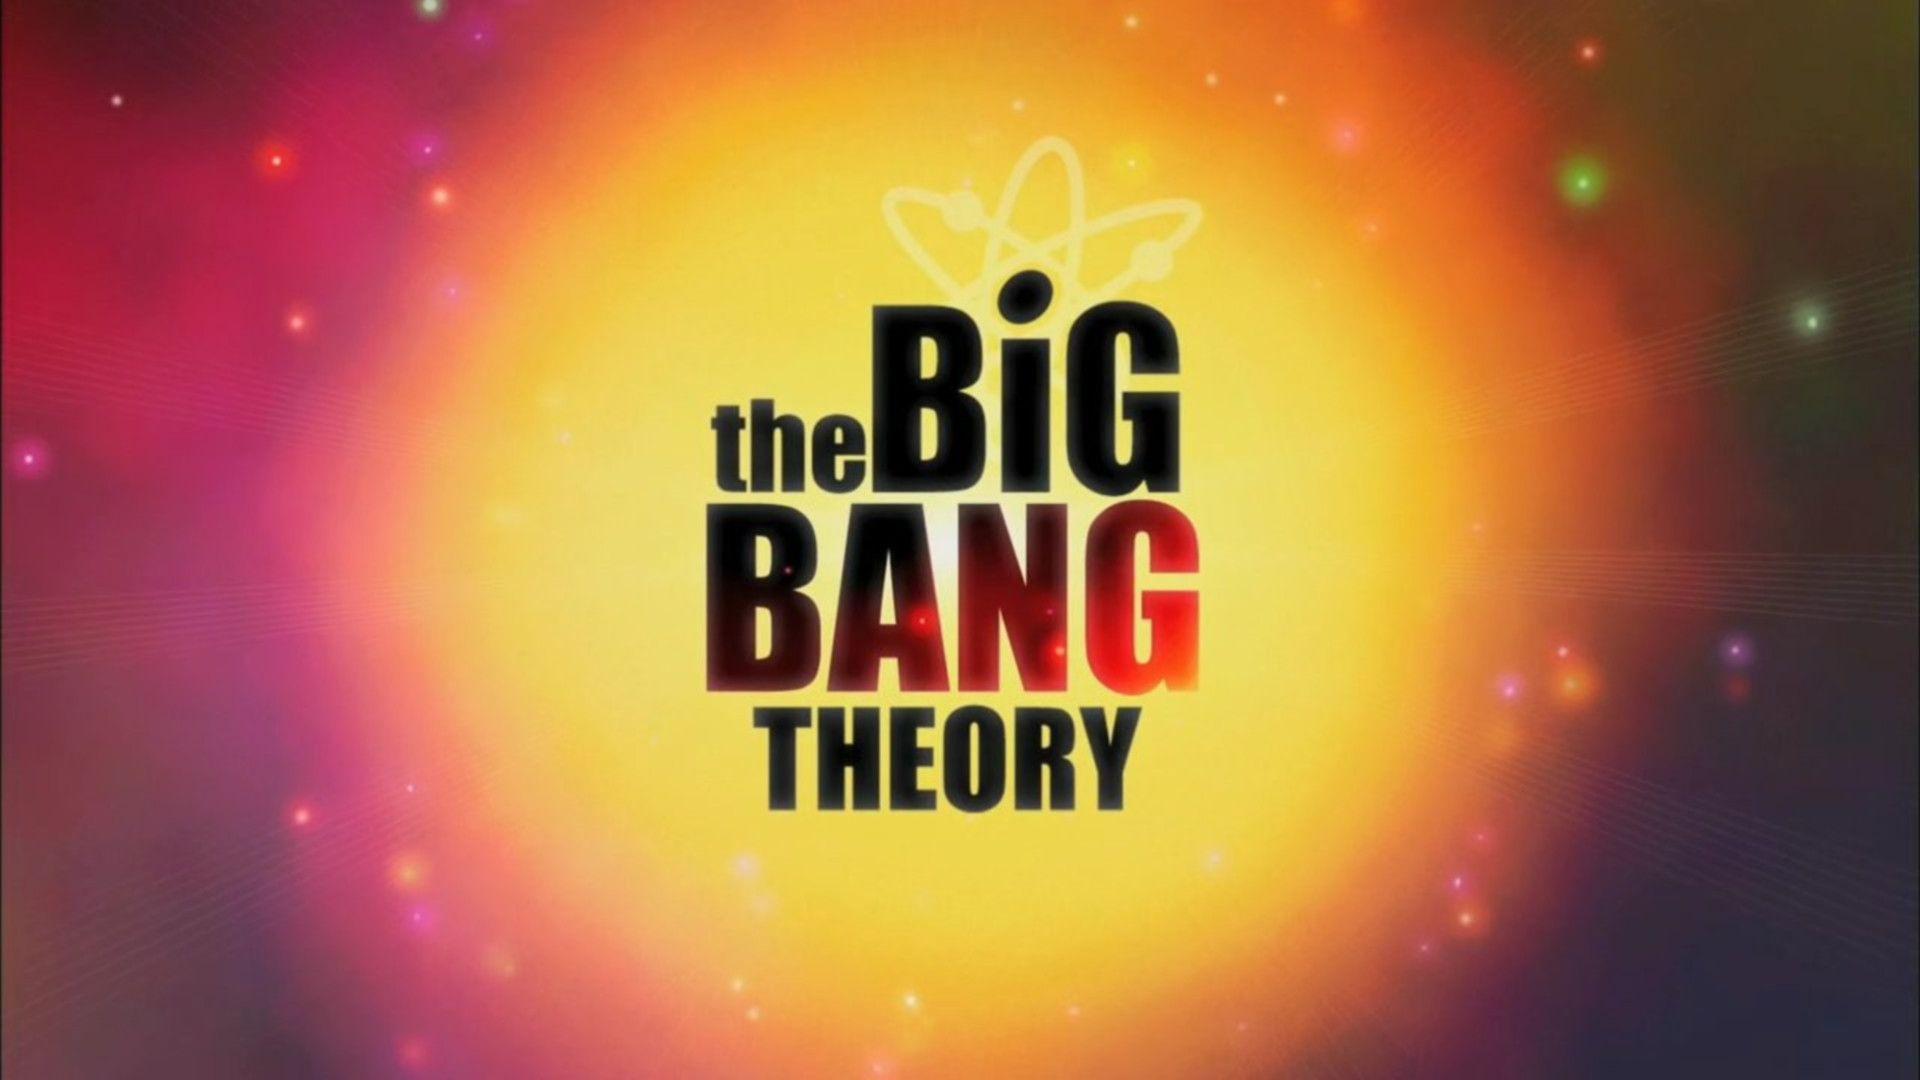 Fonds d&The Big Bang Theory tous les wallpapers The Big